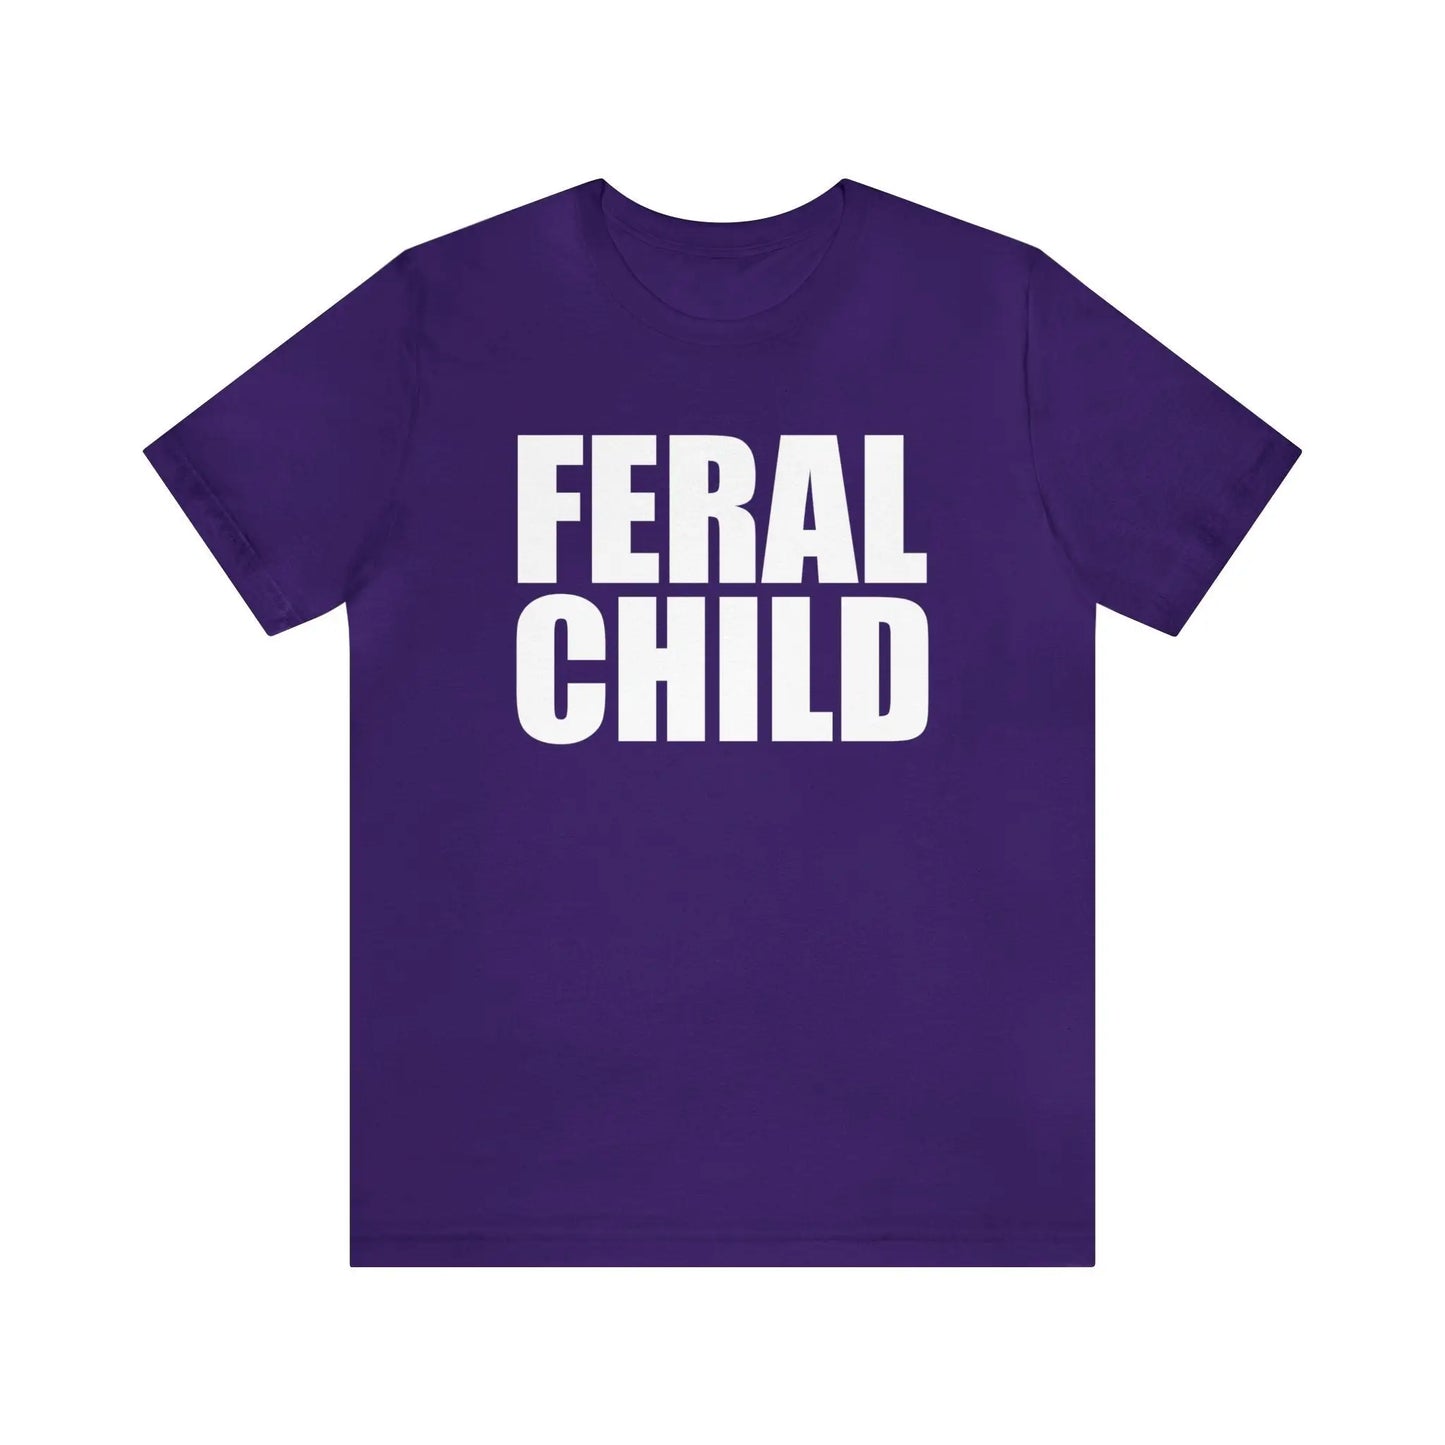 Feral Child Men's Tee - Wicked Tees